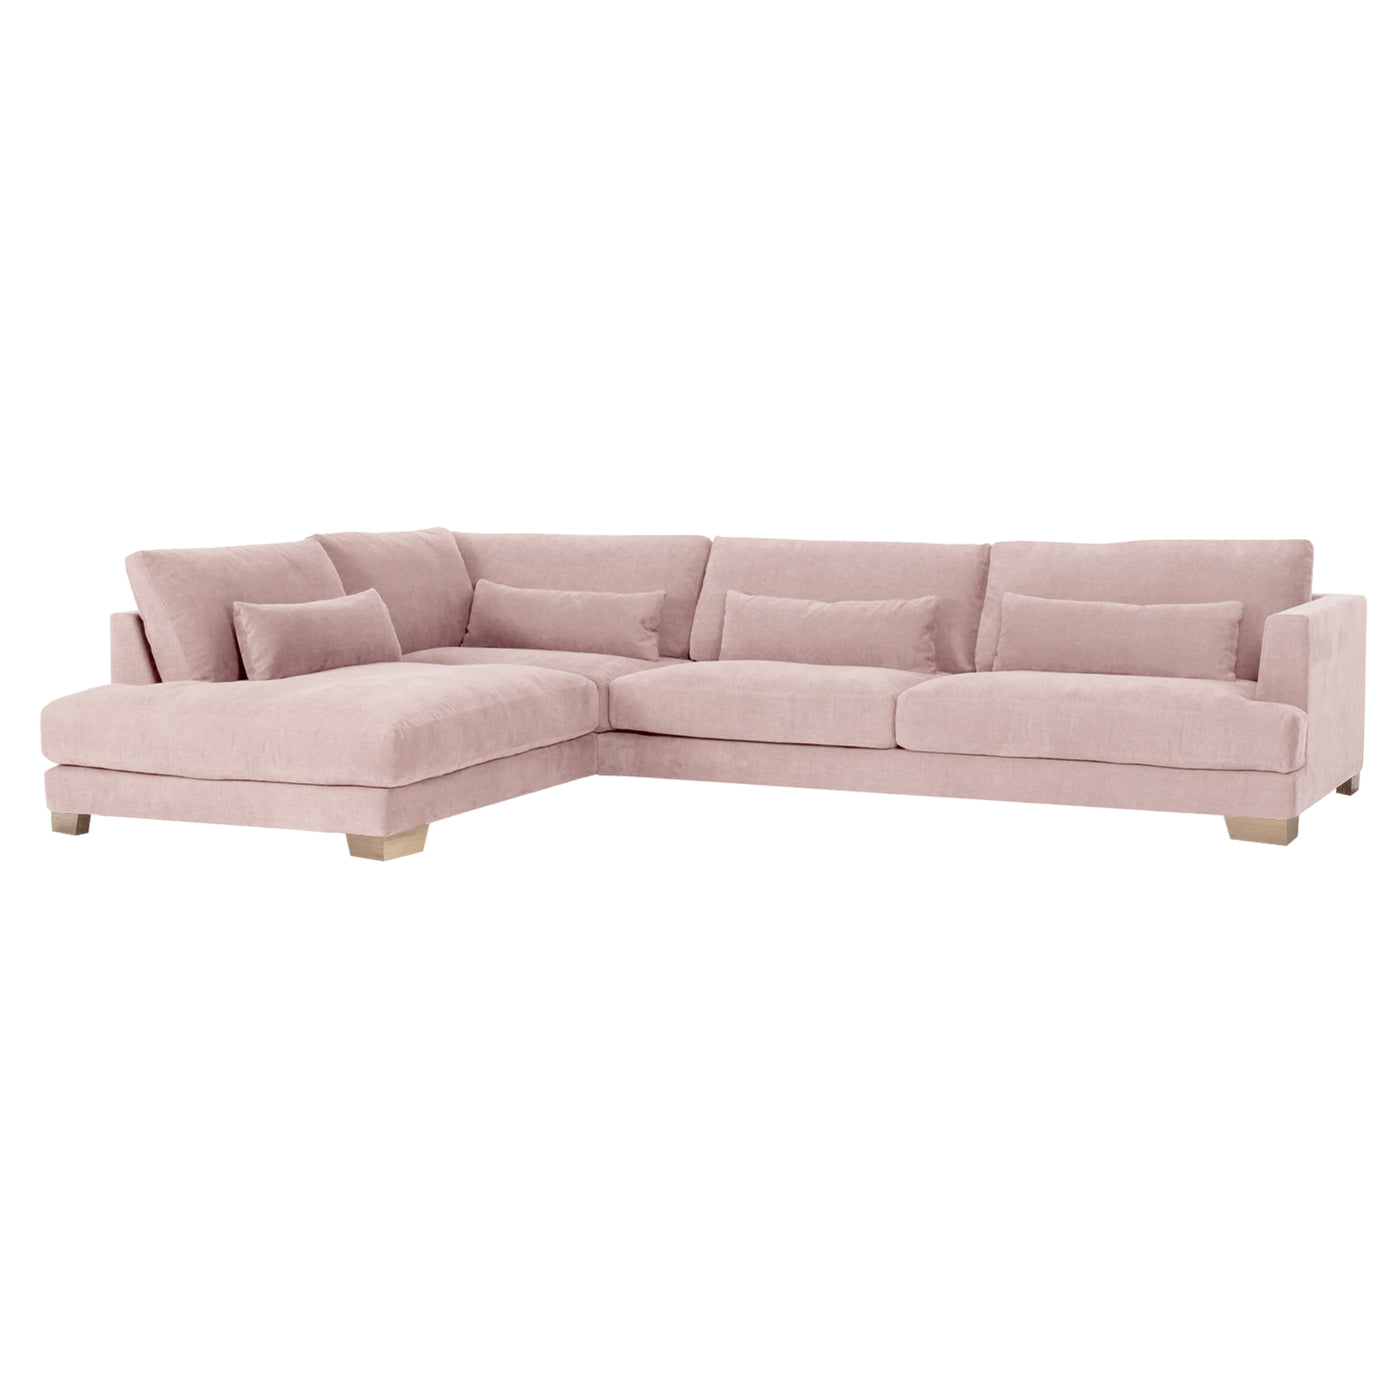 someday designs toft corner sofa in pure 04 nude pink with oak legs LHF. #colour_pure-04-nude-pink